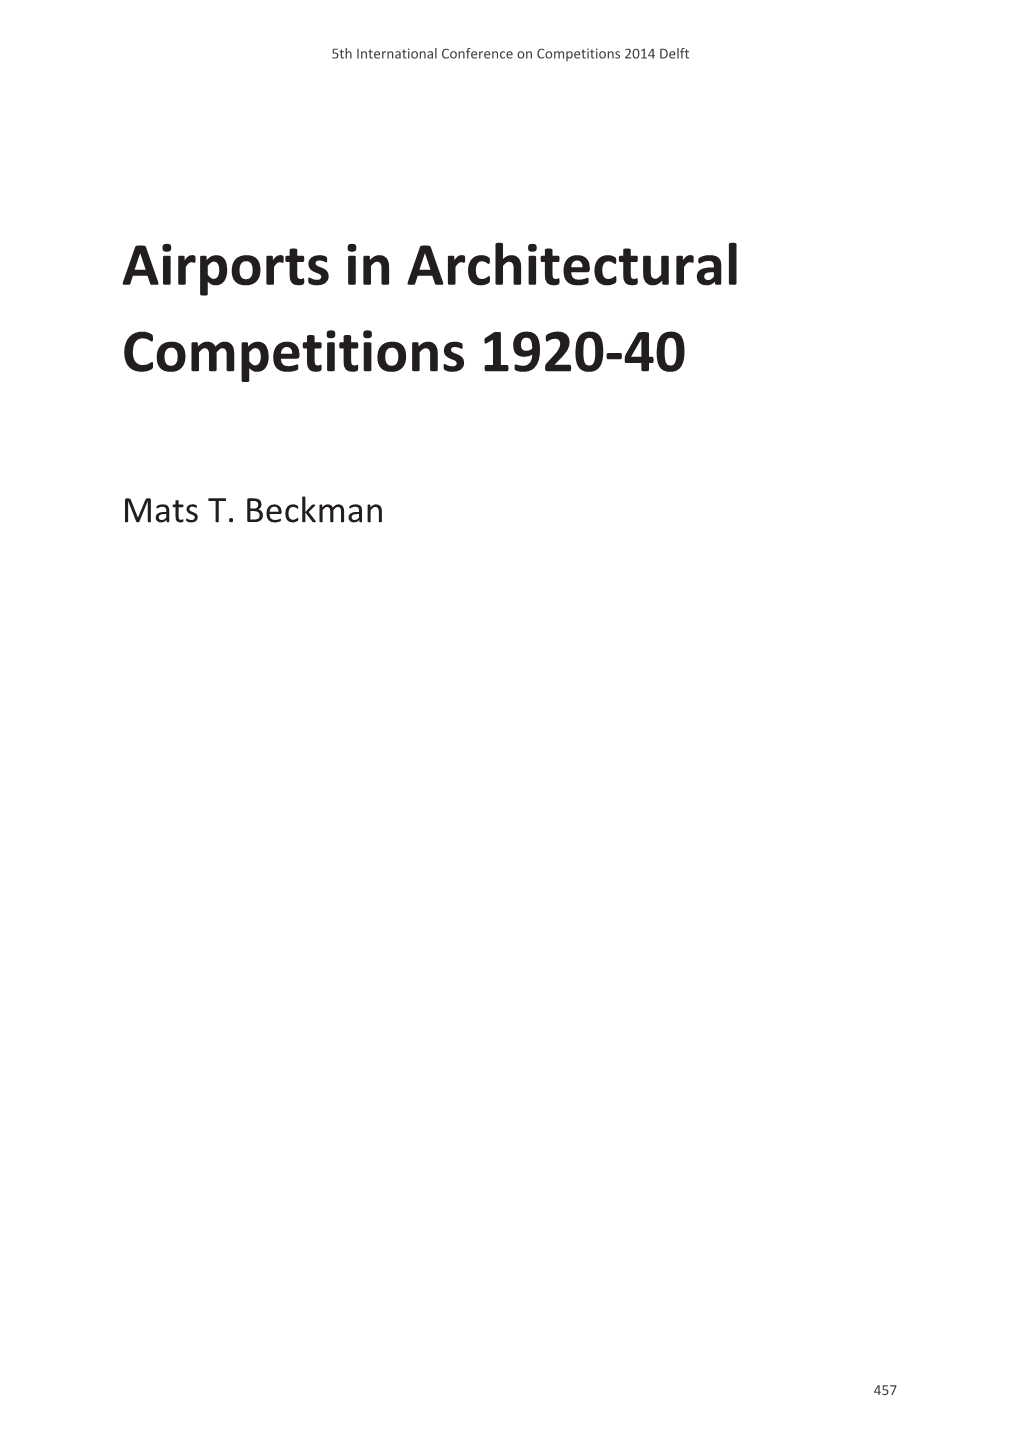 Airports in Architectural Competitions 1920-40